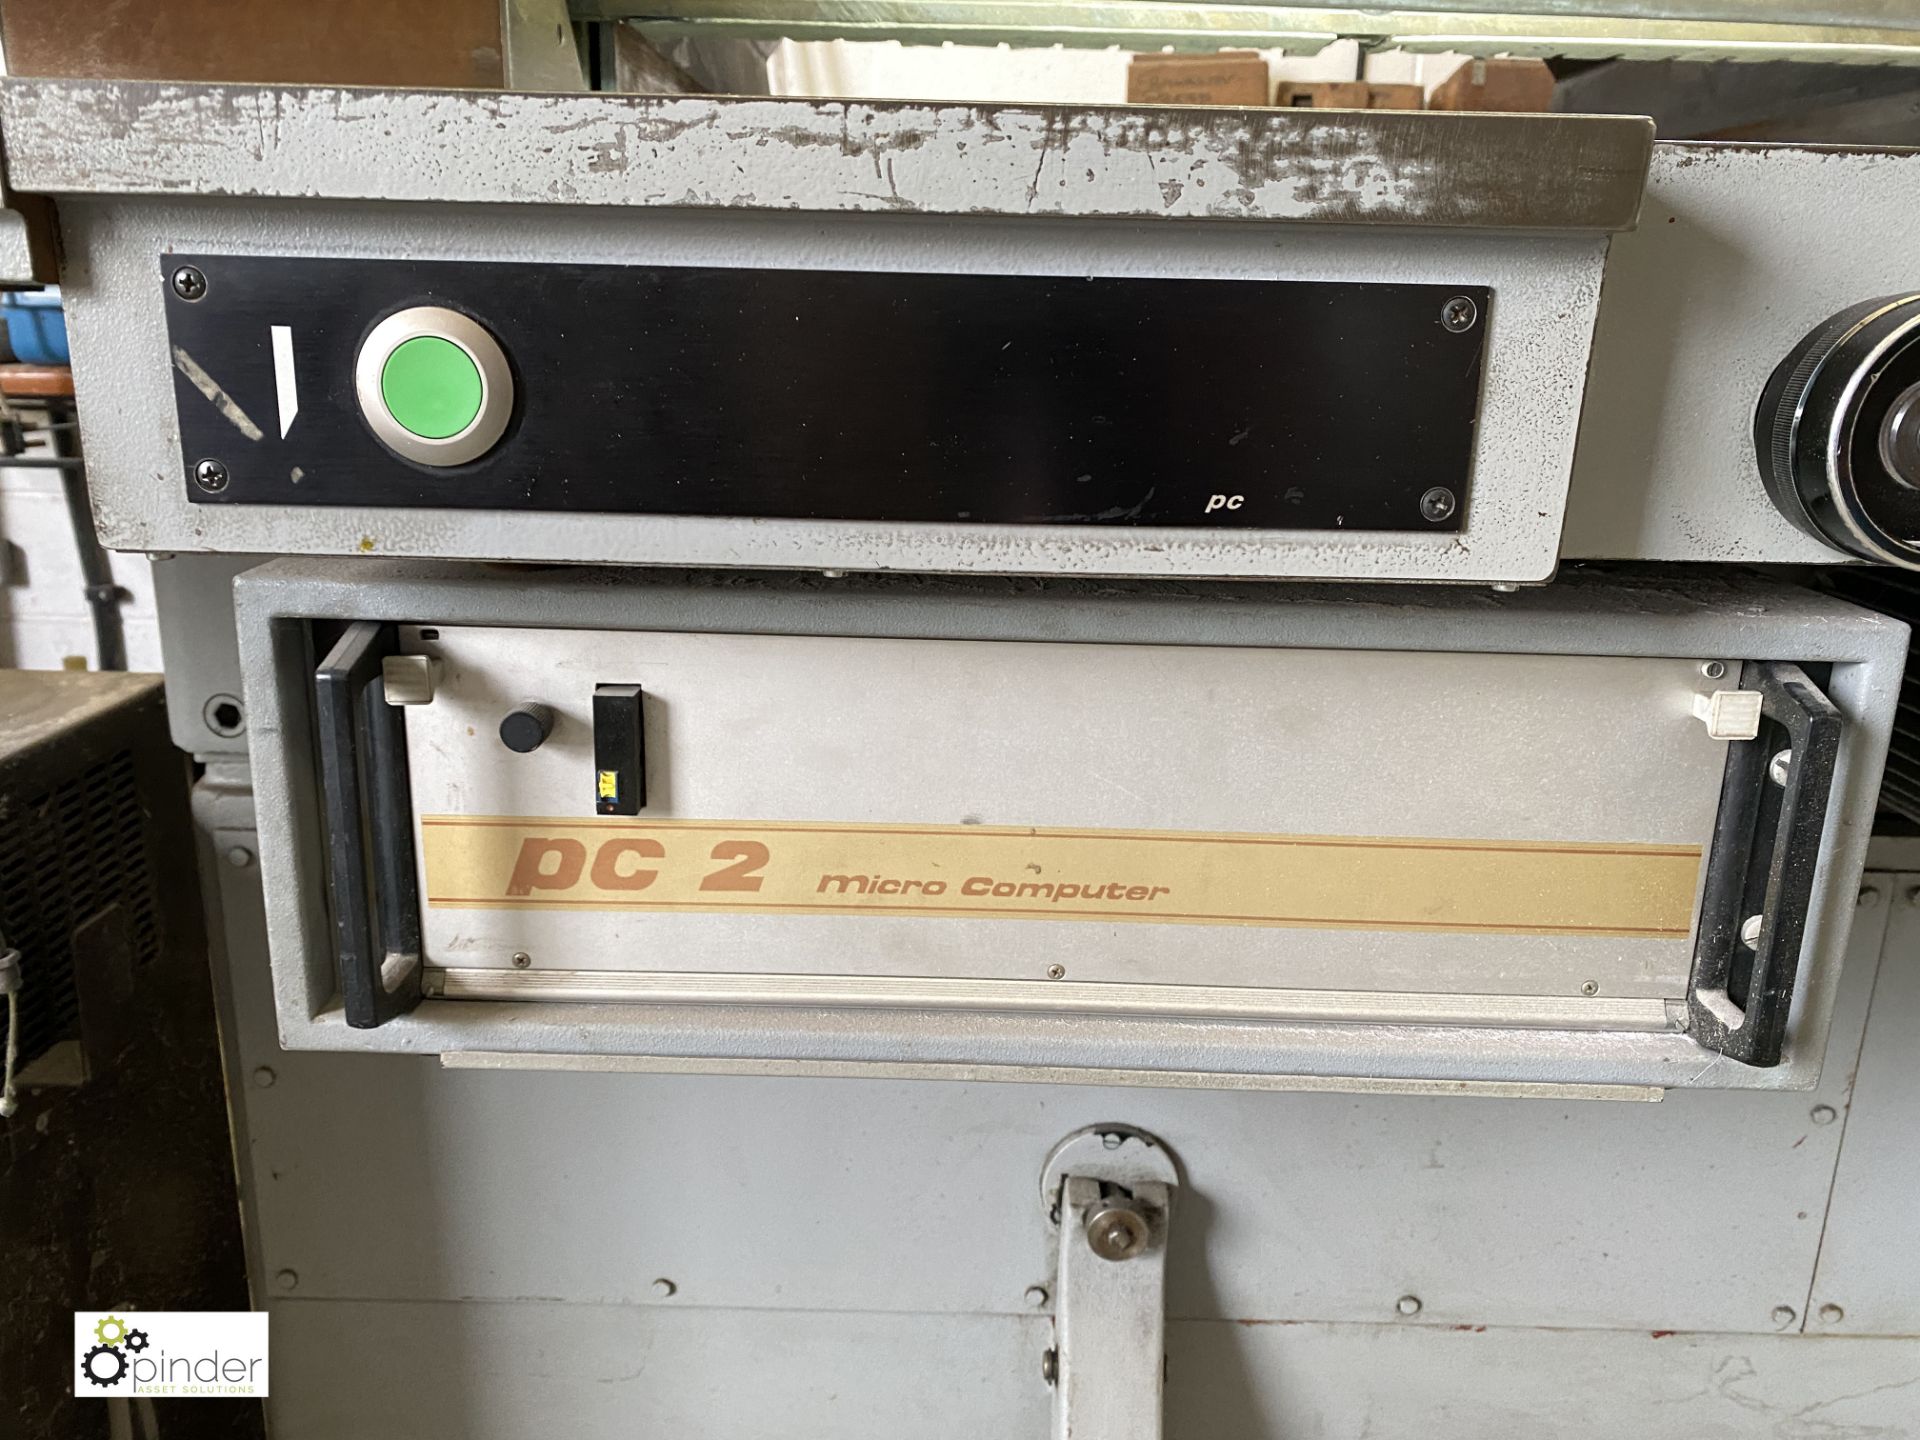 Schneider Senator Guillotine 92 PC 2 Guillotine, 920mm cutting width (this lot is located in - Image 10 of 10